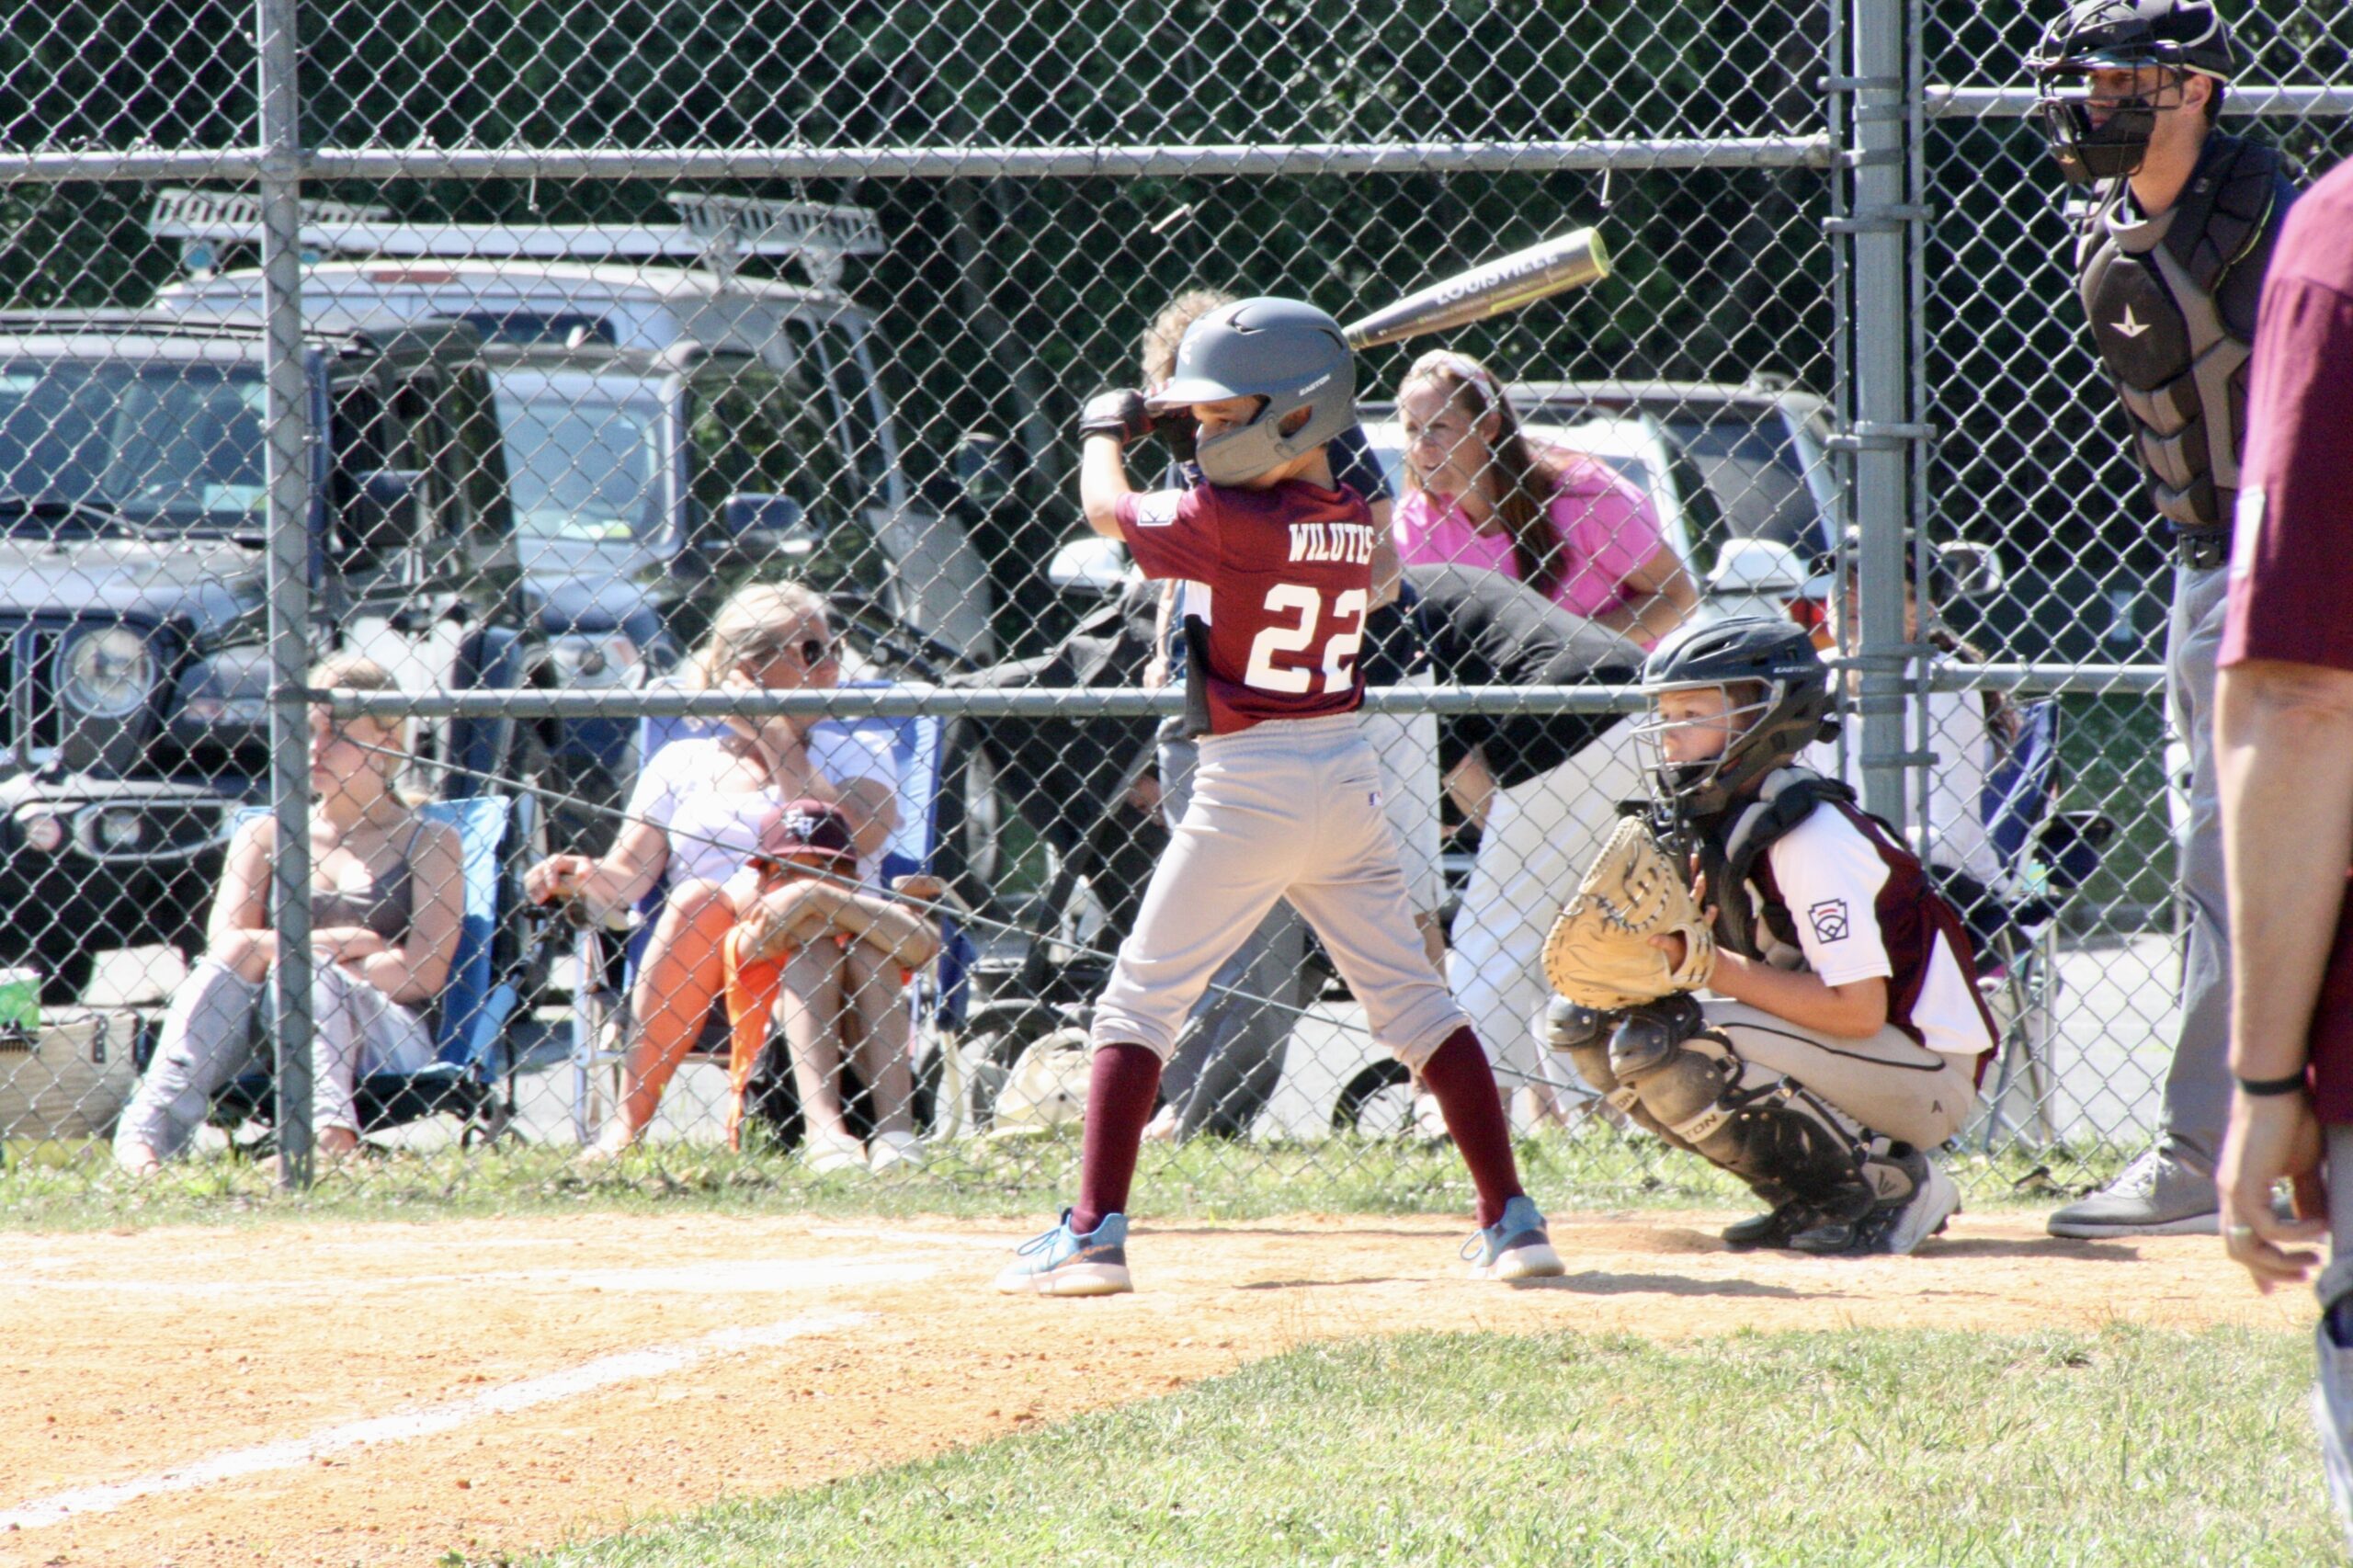 Read Wilutis at the plate for the Southampton Minors All-Stars.